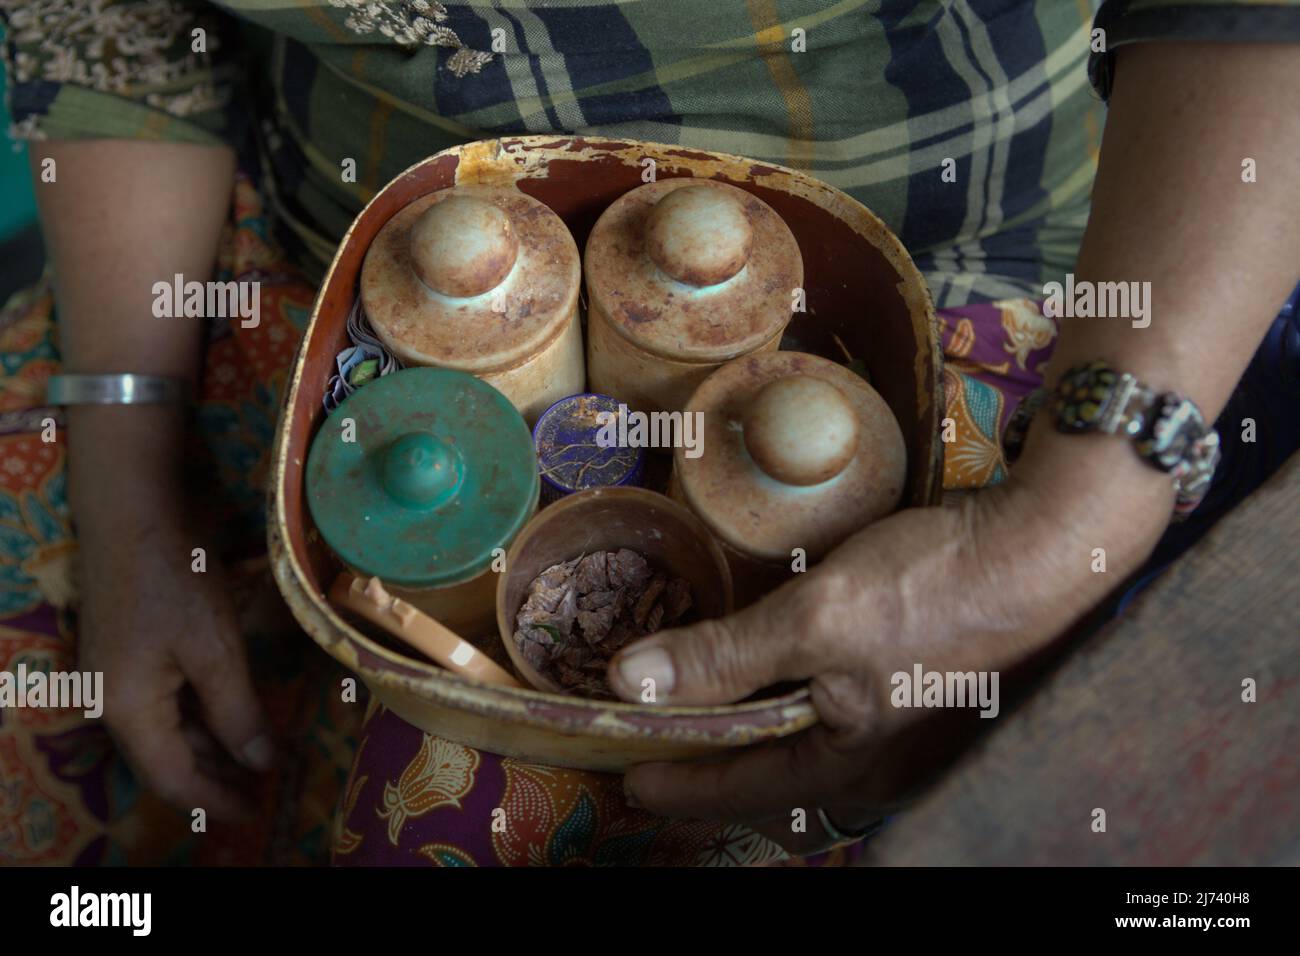 A woman showing a set of plastic vessels where she store materials for 'betel chewing' at her floating house on Musi river in Palembang, South Sumatra, Indonesia. Betel chewing—which commonly require areca nuts, slaked lime and betel leaves—is a tradition that can be found quite easily among elders in present day Malaysia and Indonesia. Areca nut, the main material for betel chewing, was a major product of Srivijaya that was mentioned by a 13th century Chinese commissioner for international trade, Chau Ju-kua (Zhao Rugua). Stock Photo